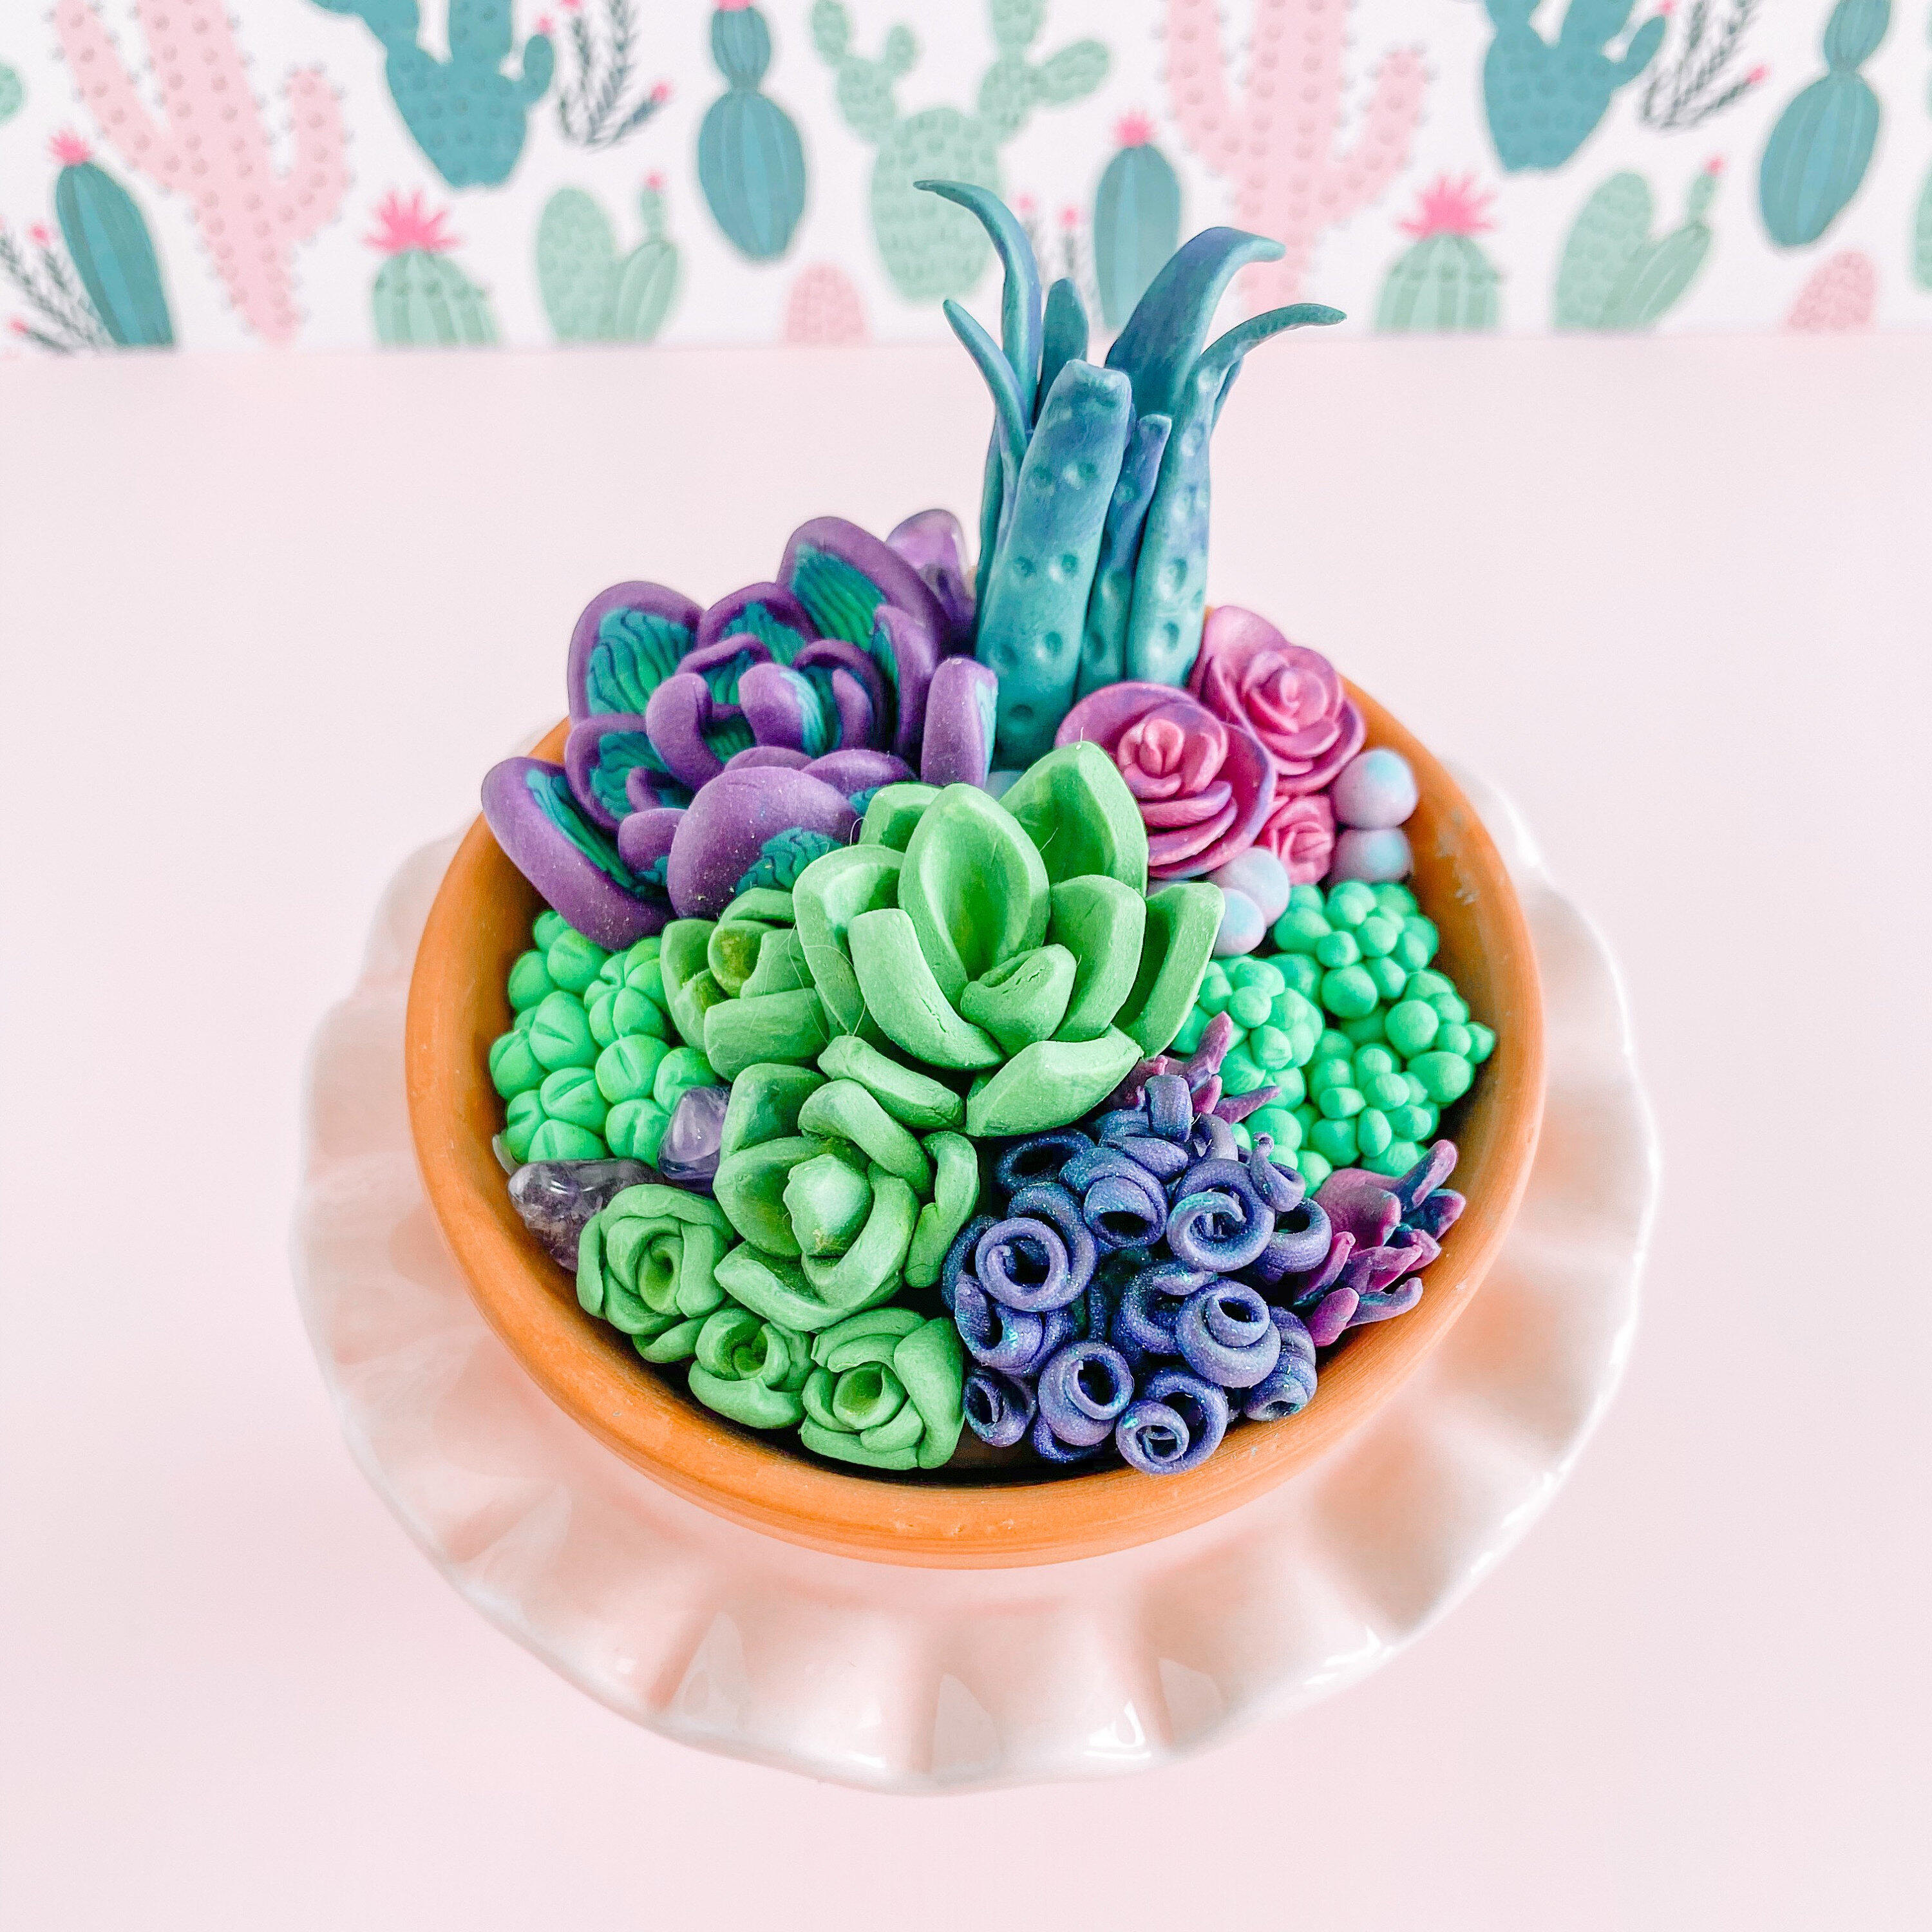 fireflyFrippery Miniature Faux Succulent and Crystal Garden